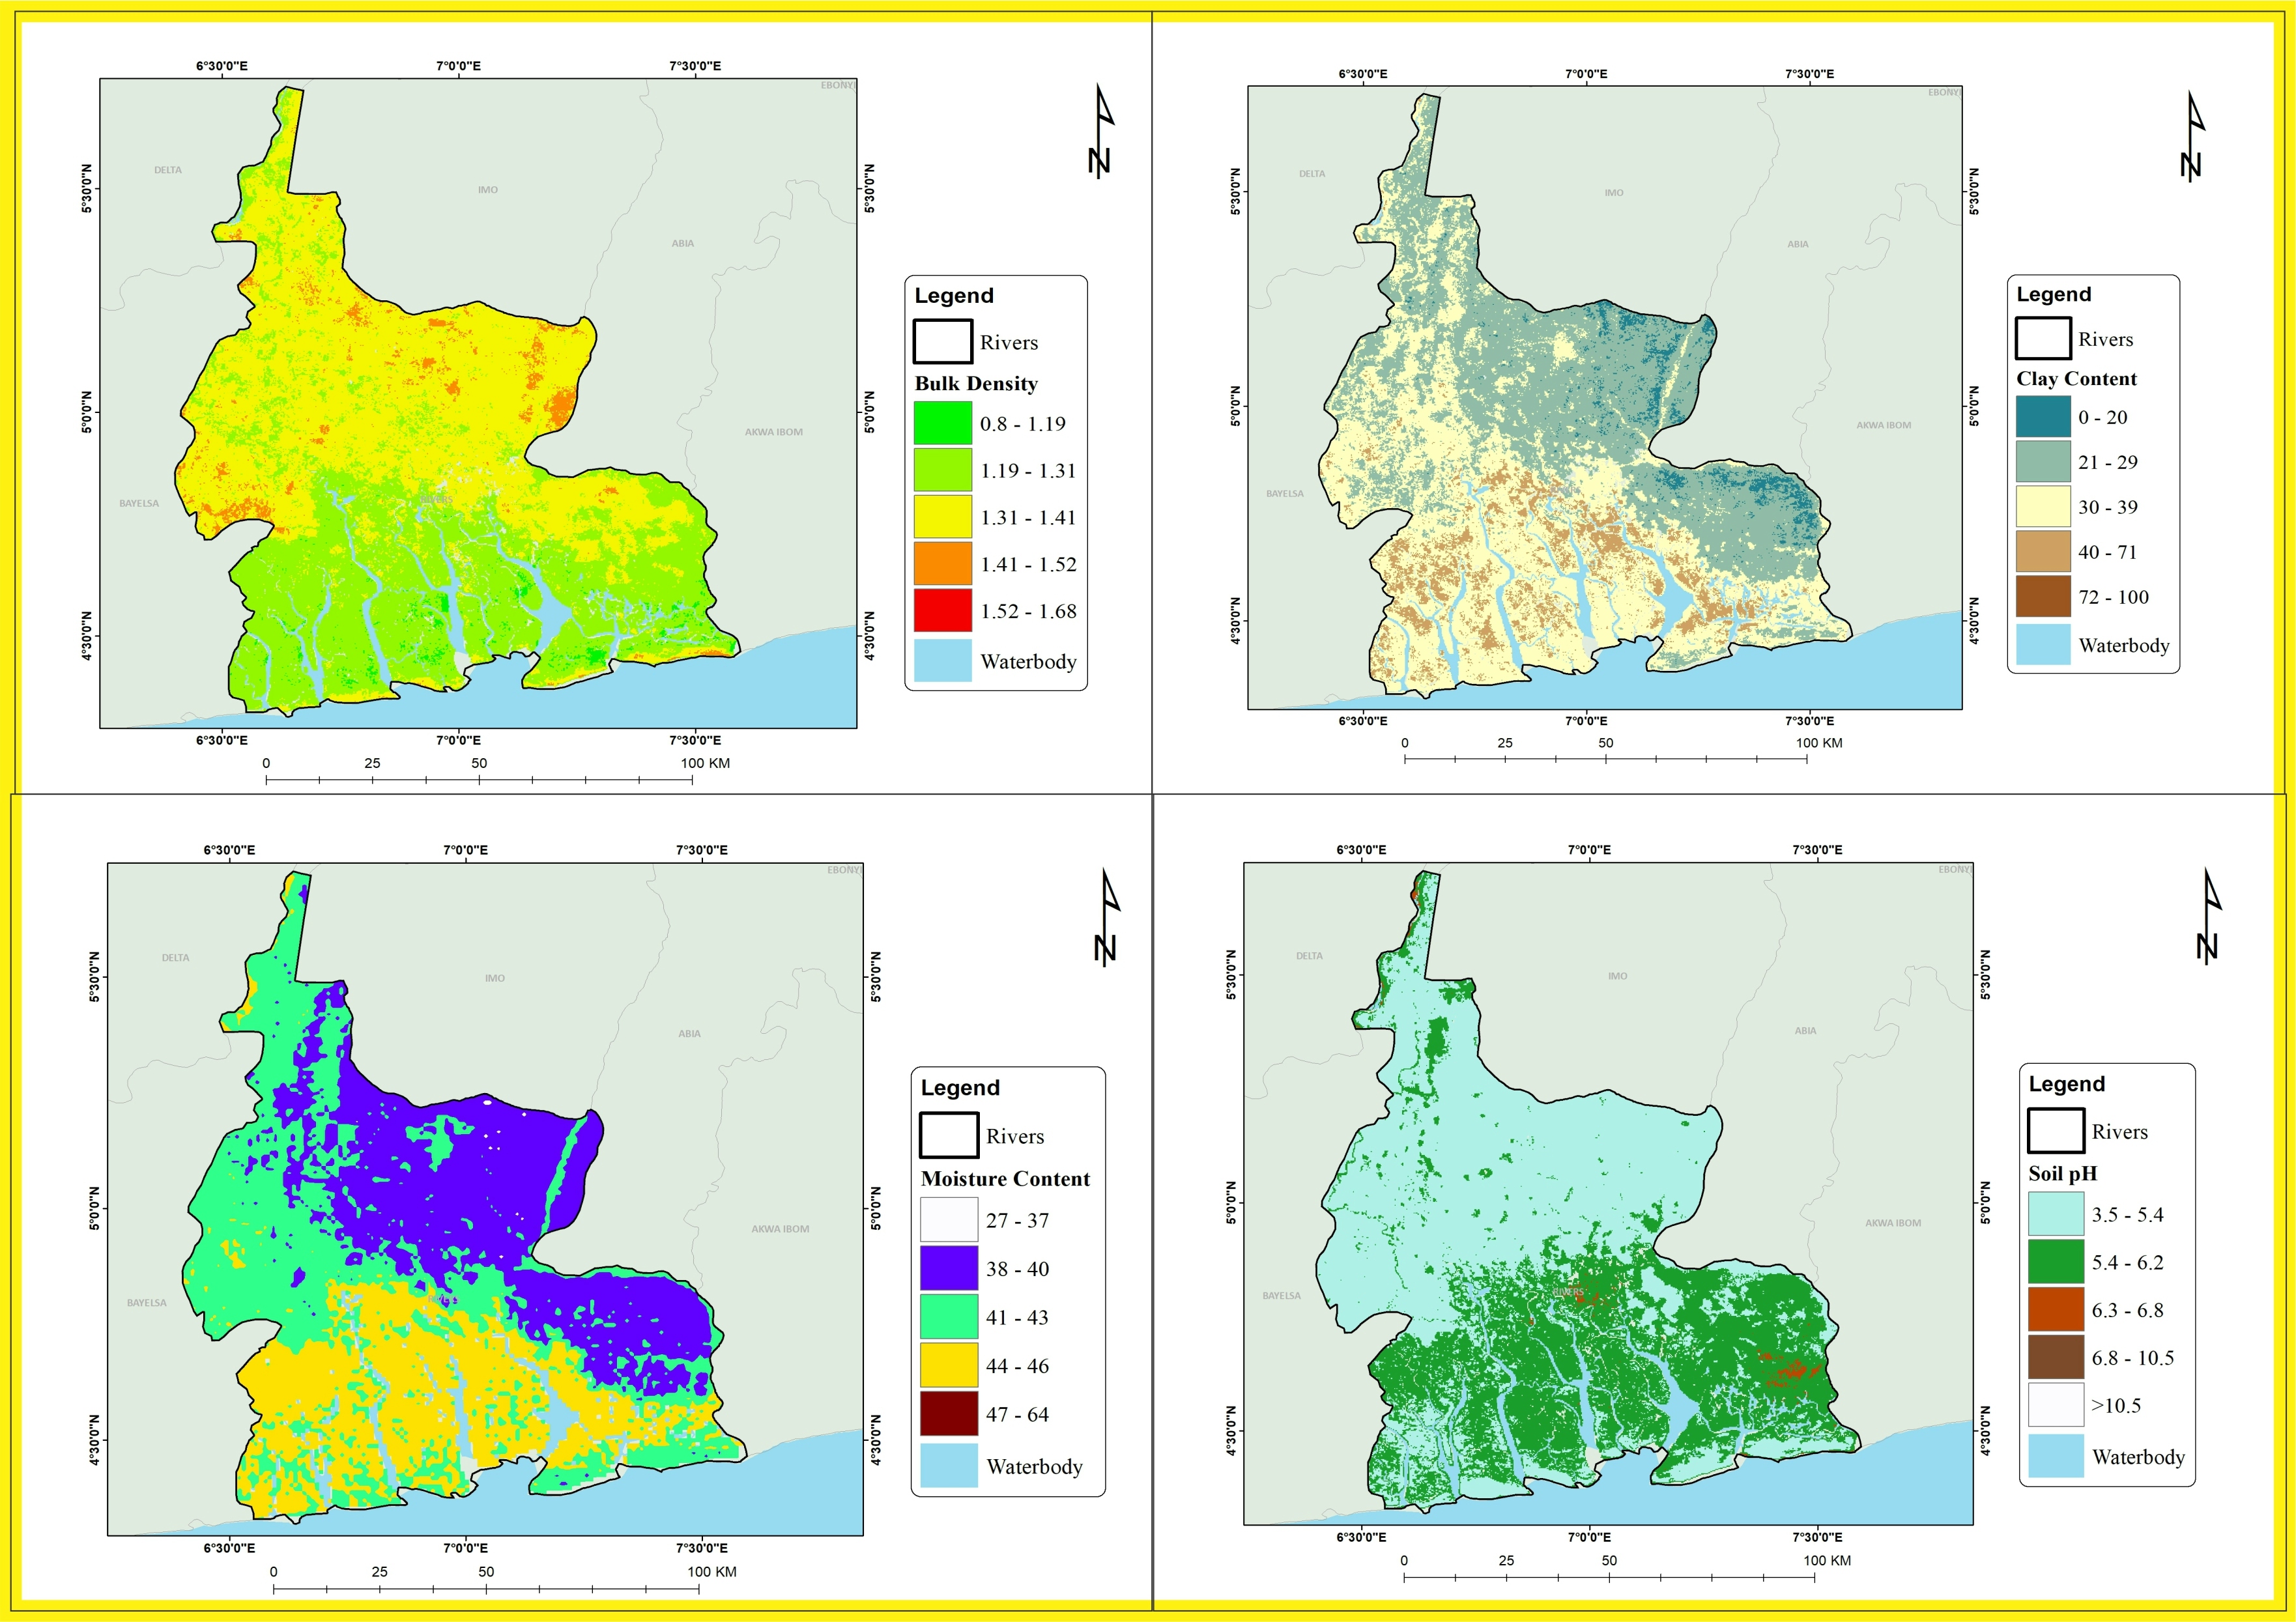 Soil Properties Map for Rivers State